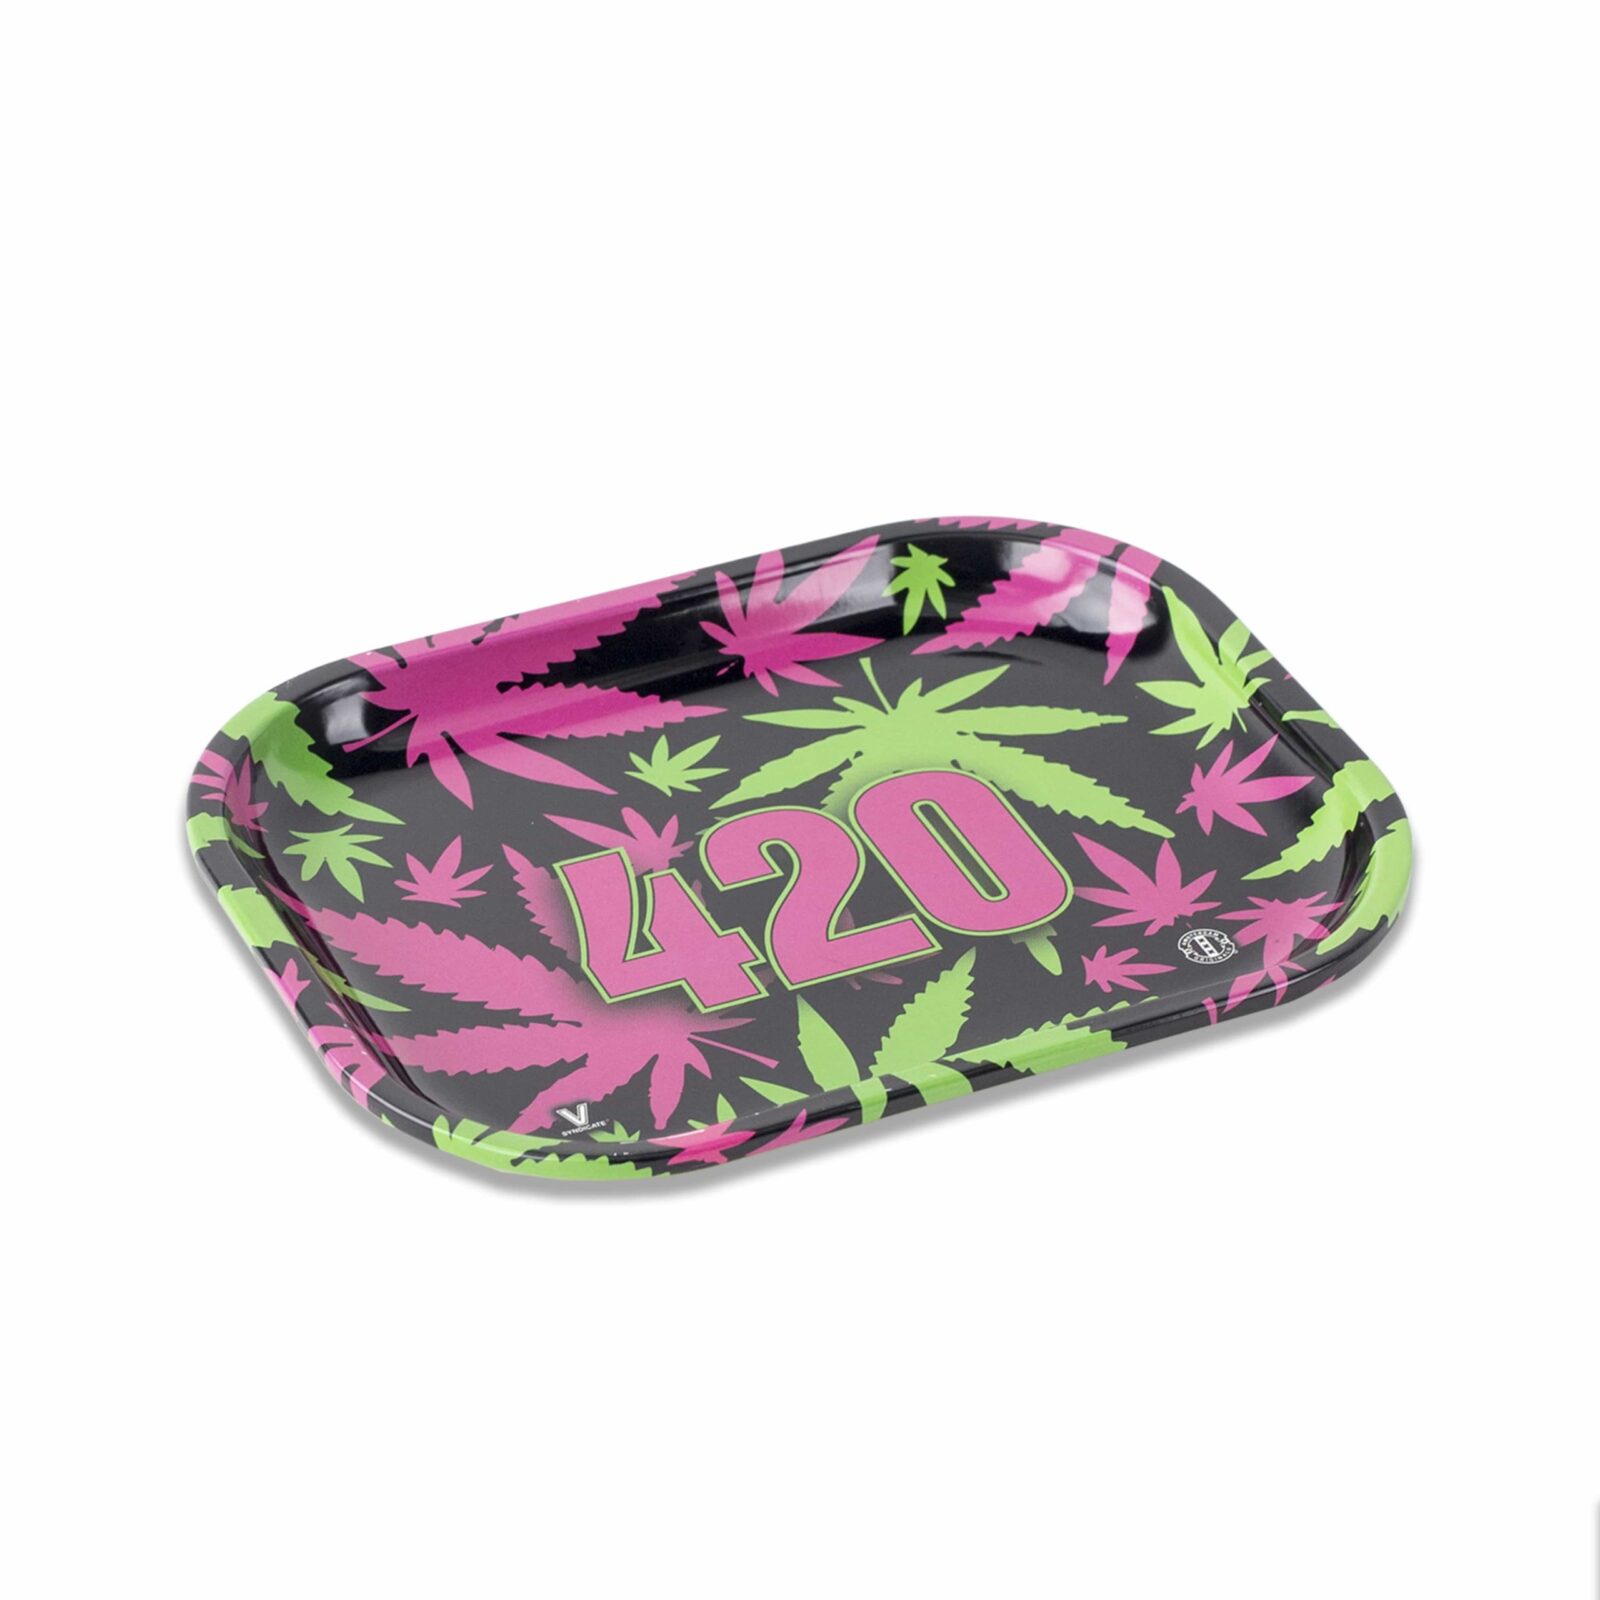 v syndicate weed 420 square rolling glass tray mini image